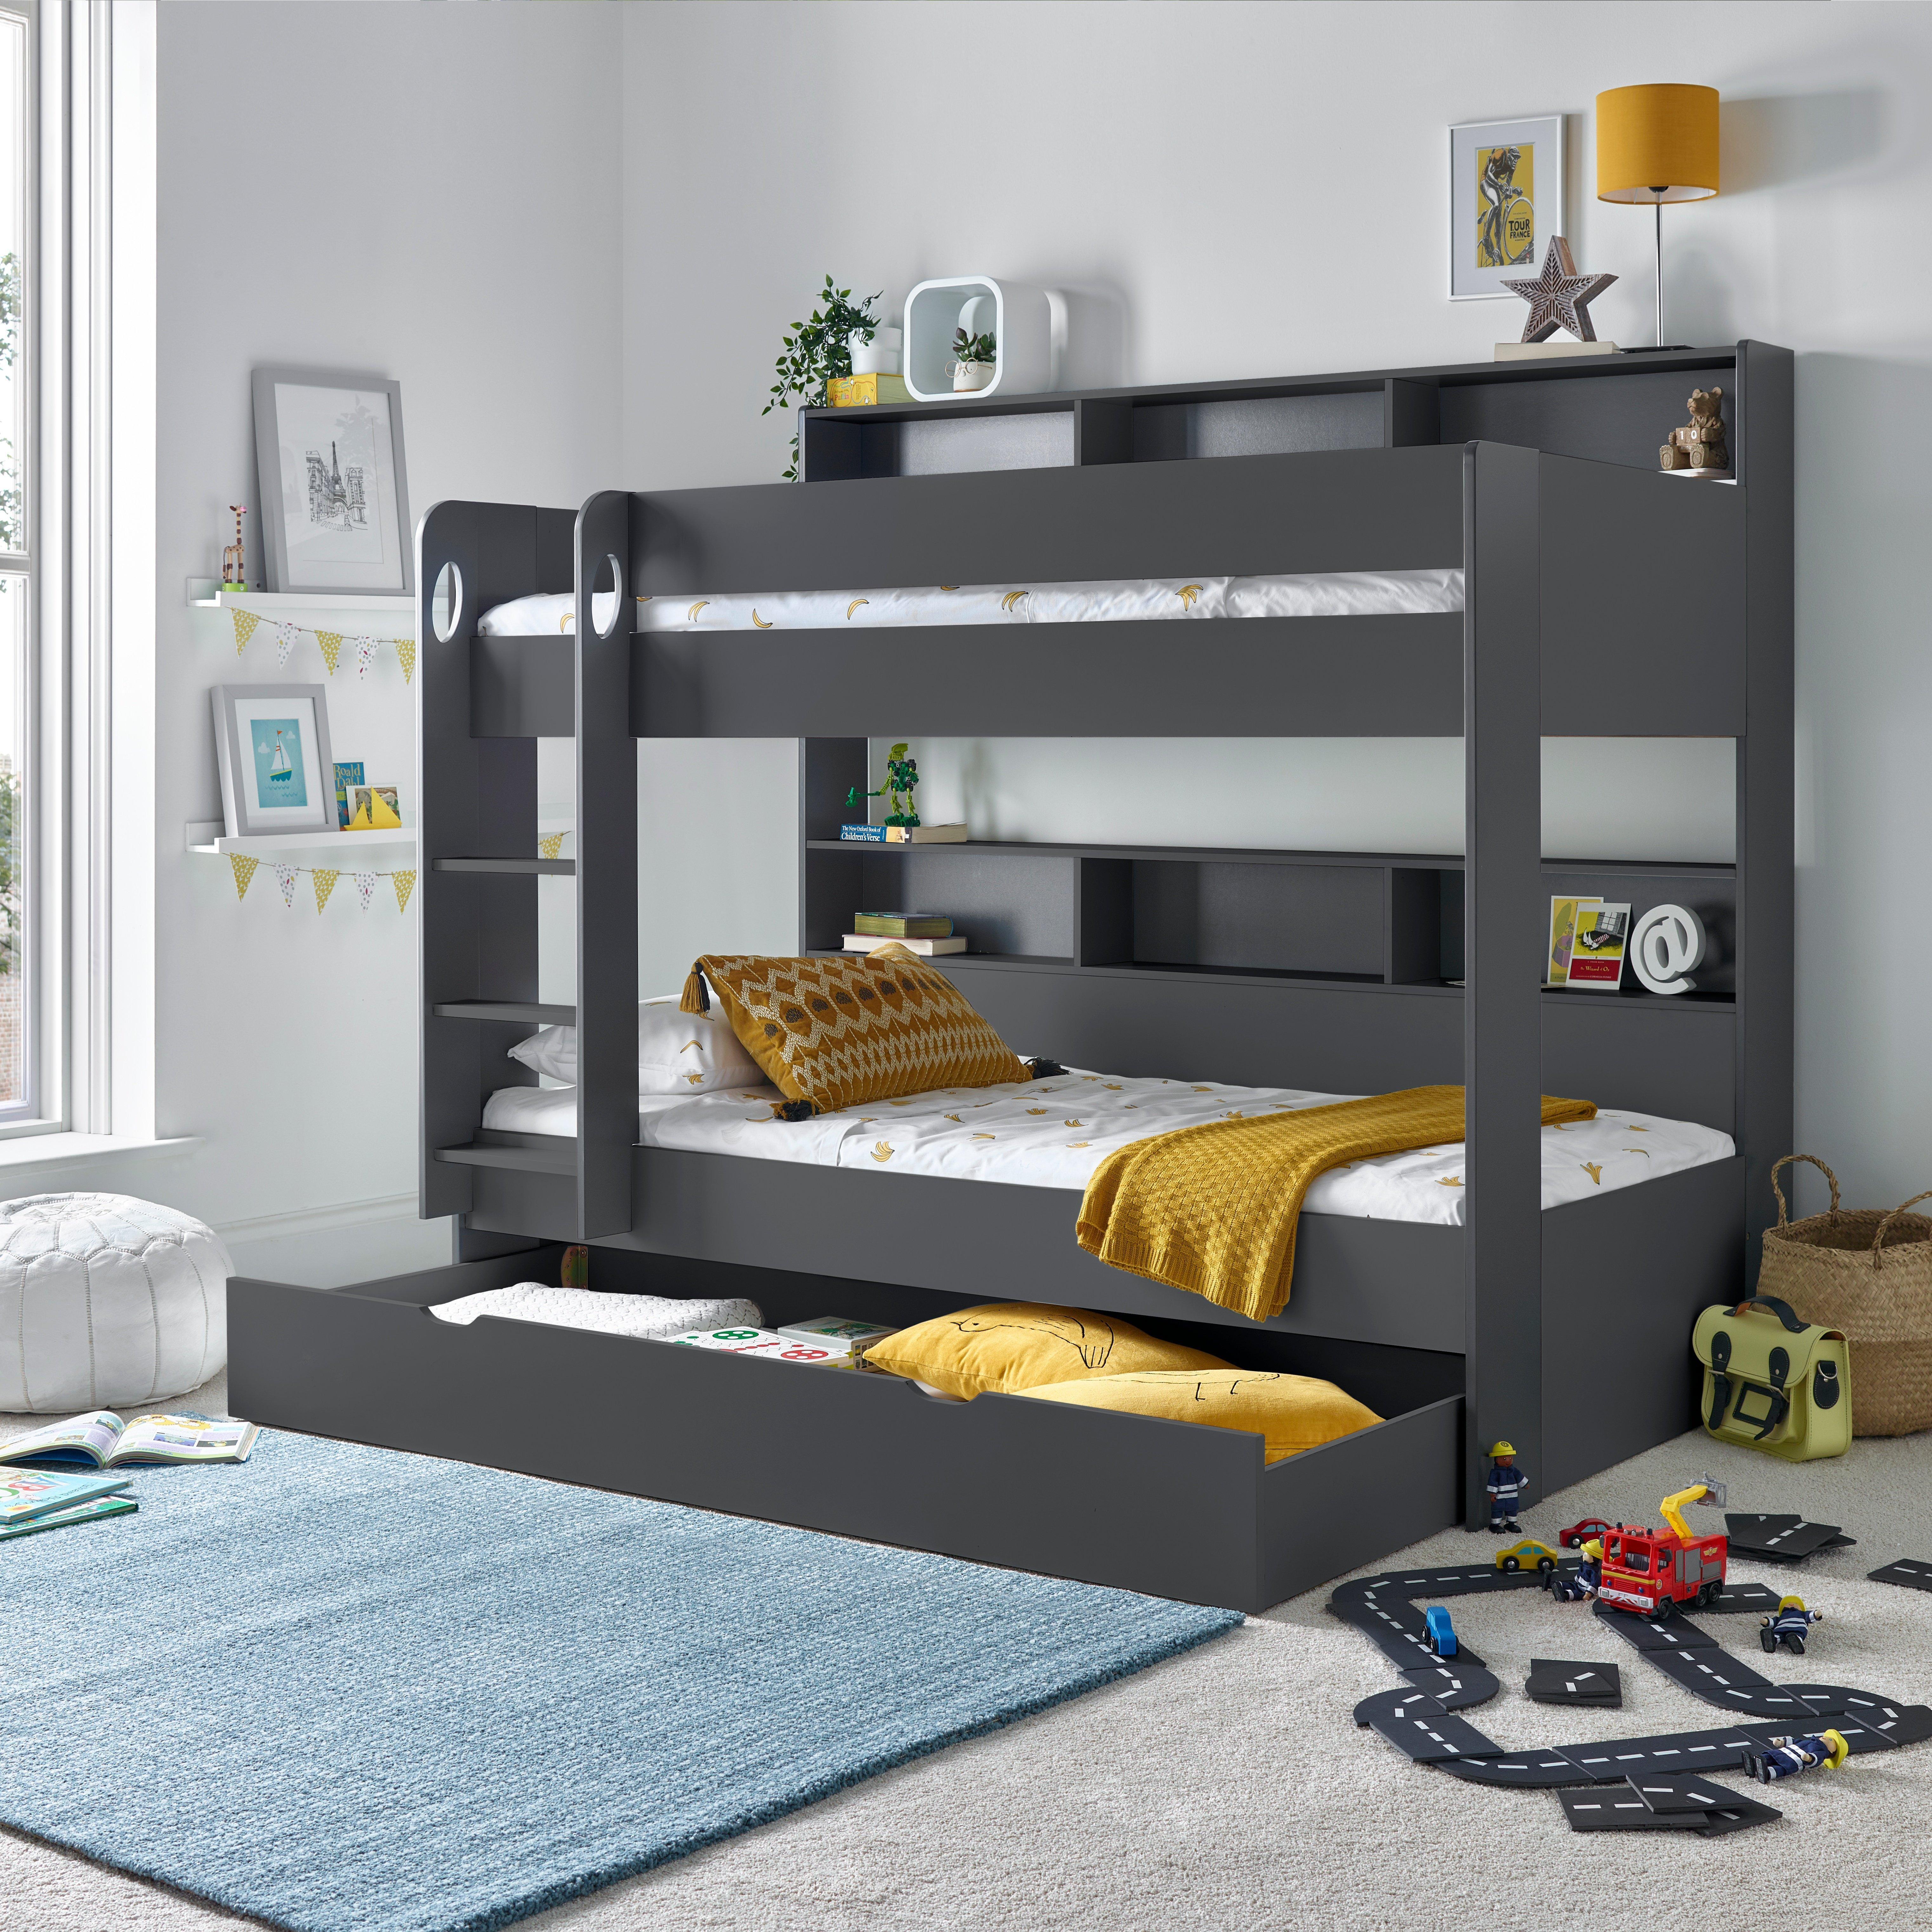 Olly Storage Bunk Bed With Drawer With Memory Foam Mattresses - image 1